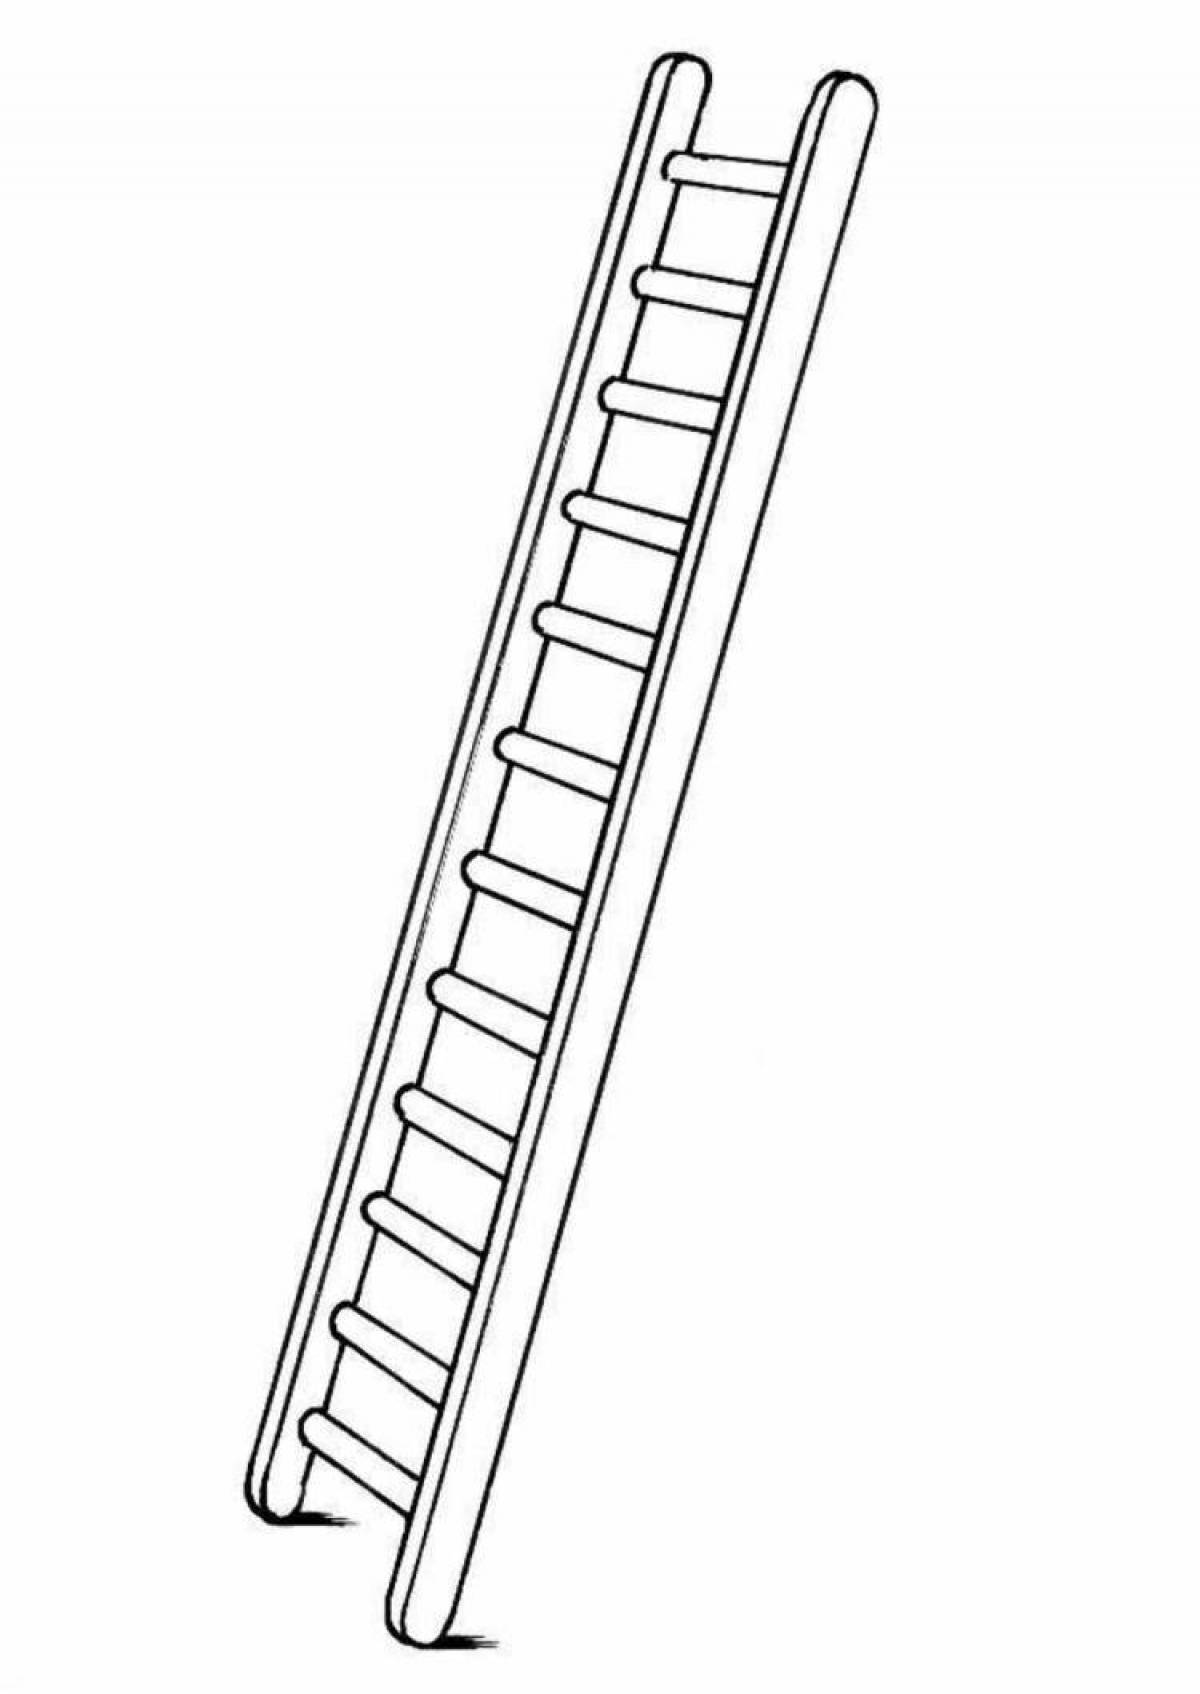 Amazing stairs coloring page